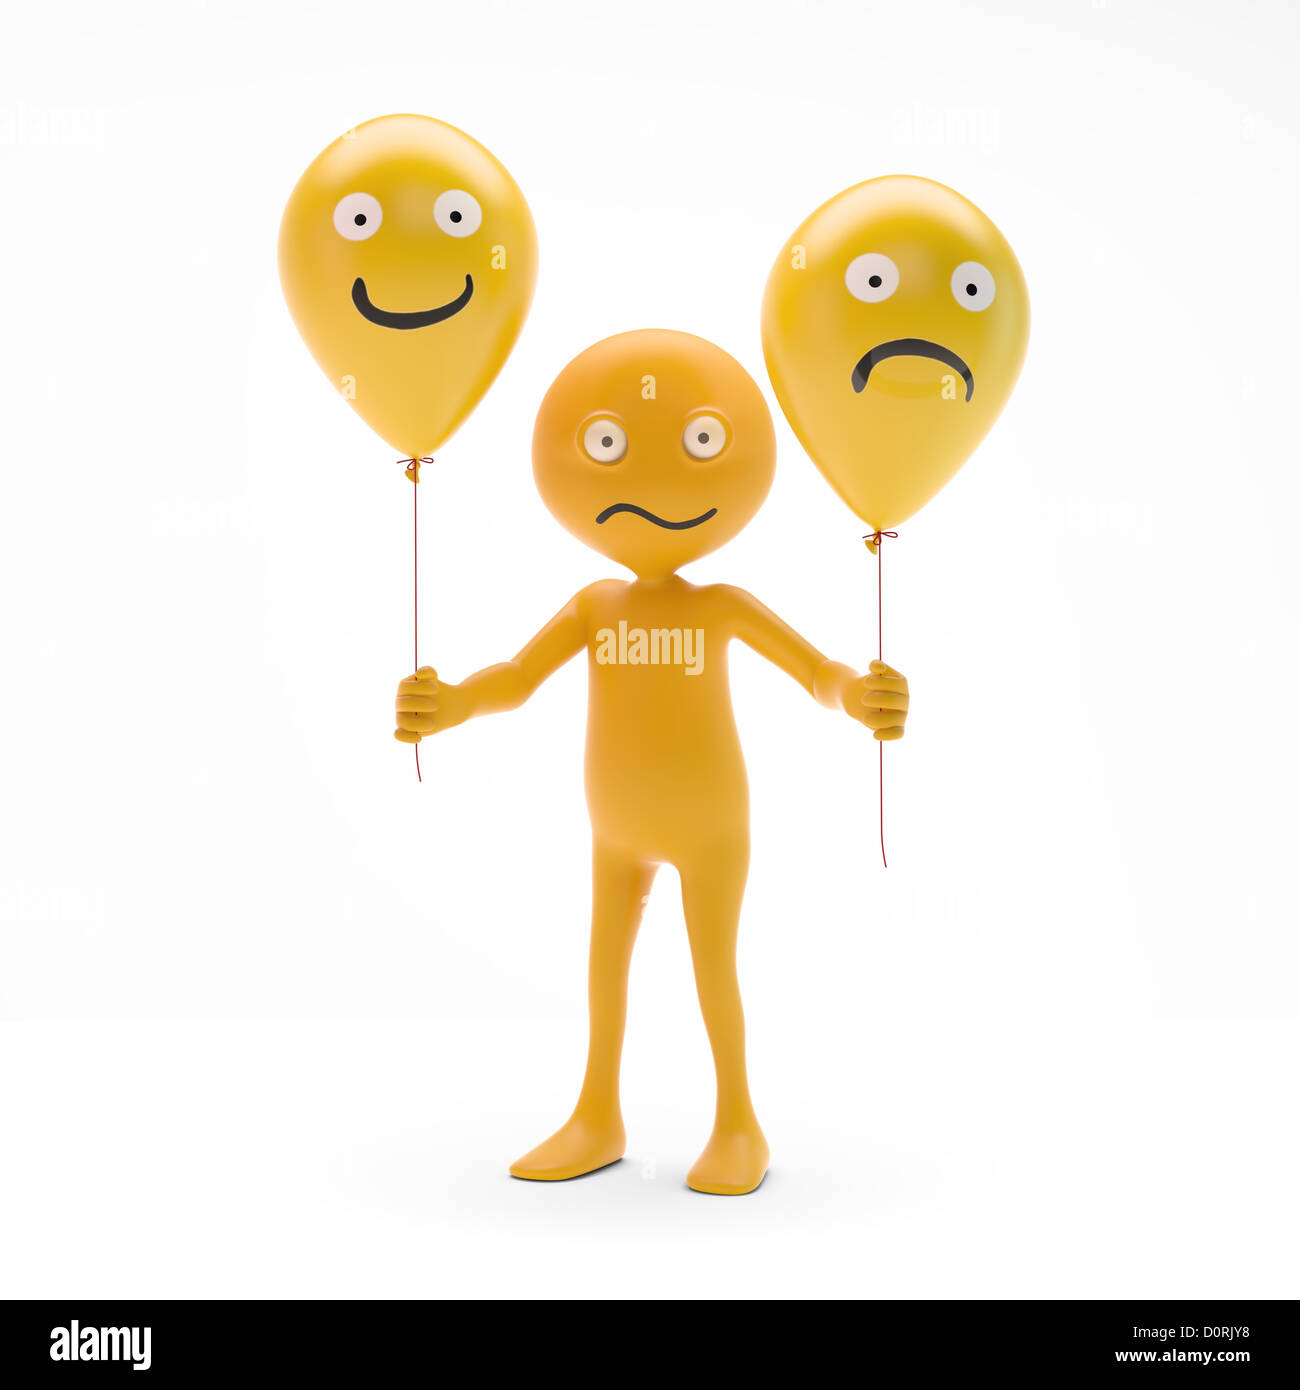 Character smiley holding balloons Stock Photo